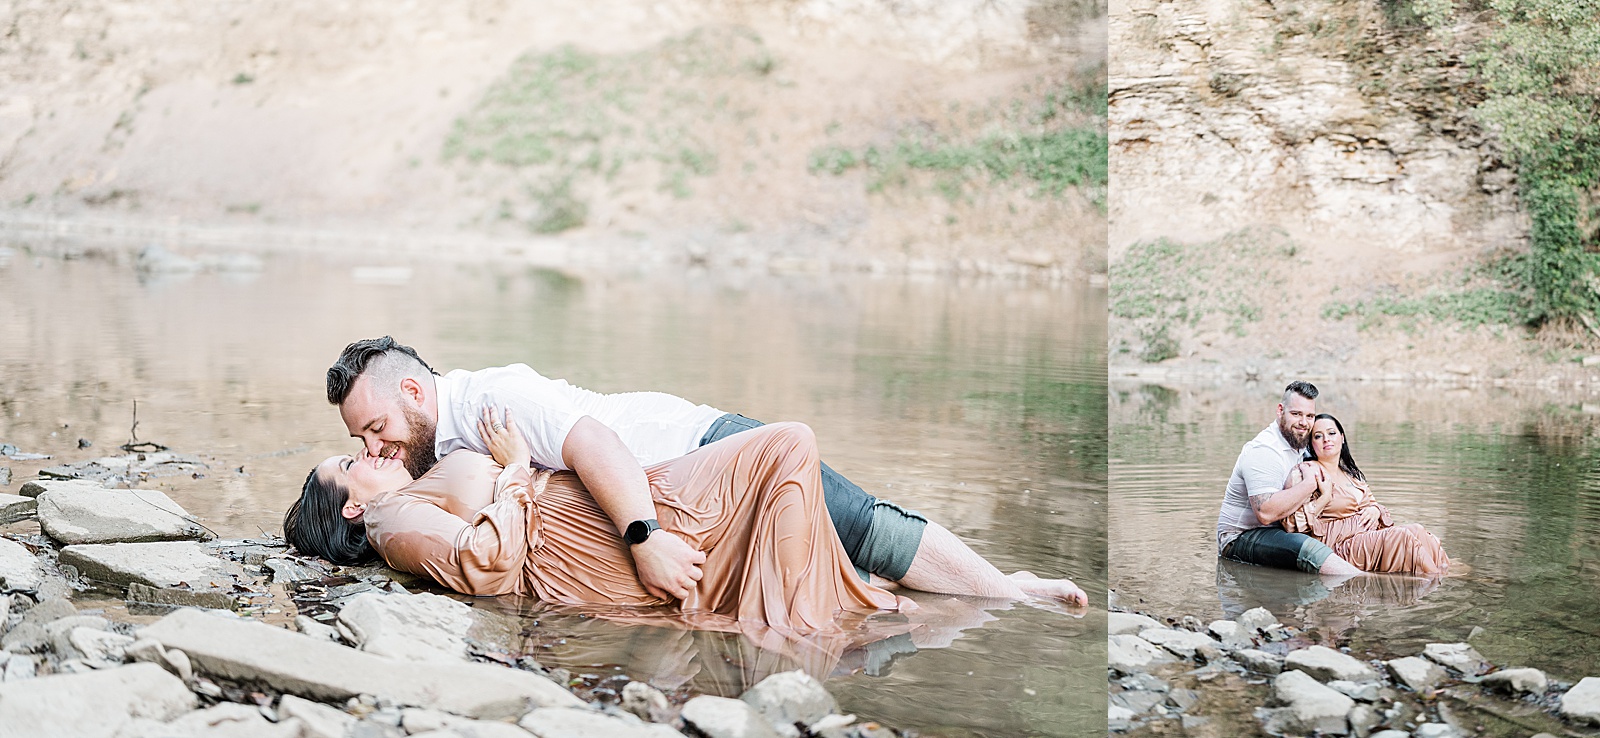 Canyon in Ohio Inspired Engagement-39.jpg